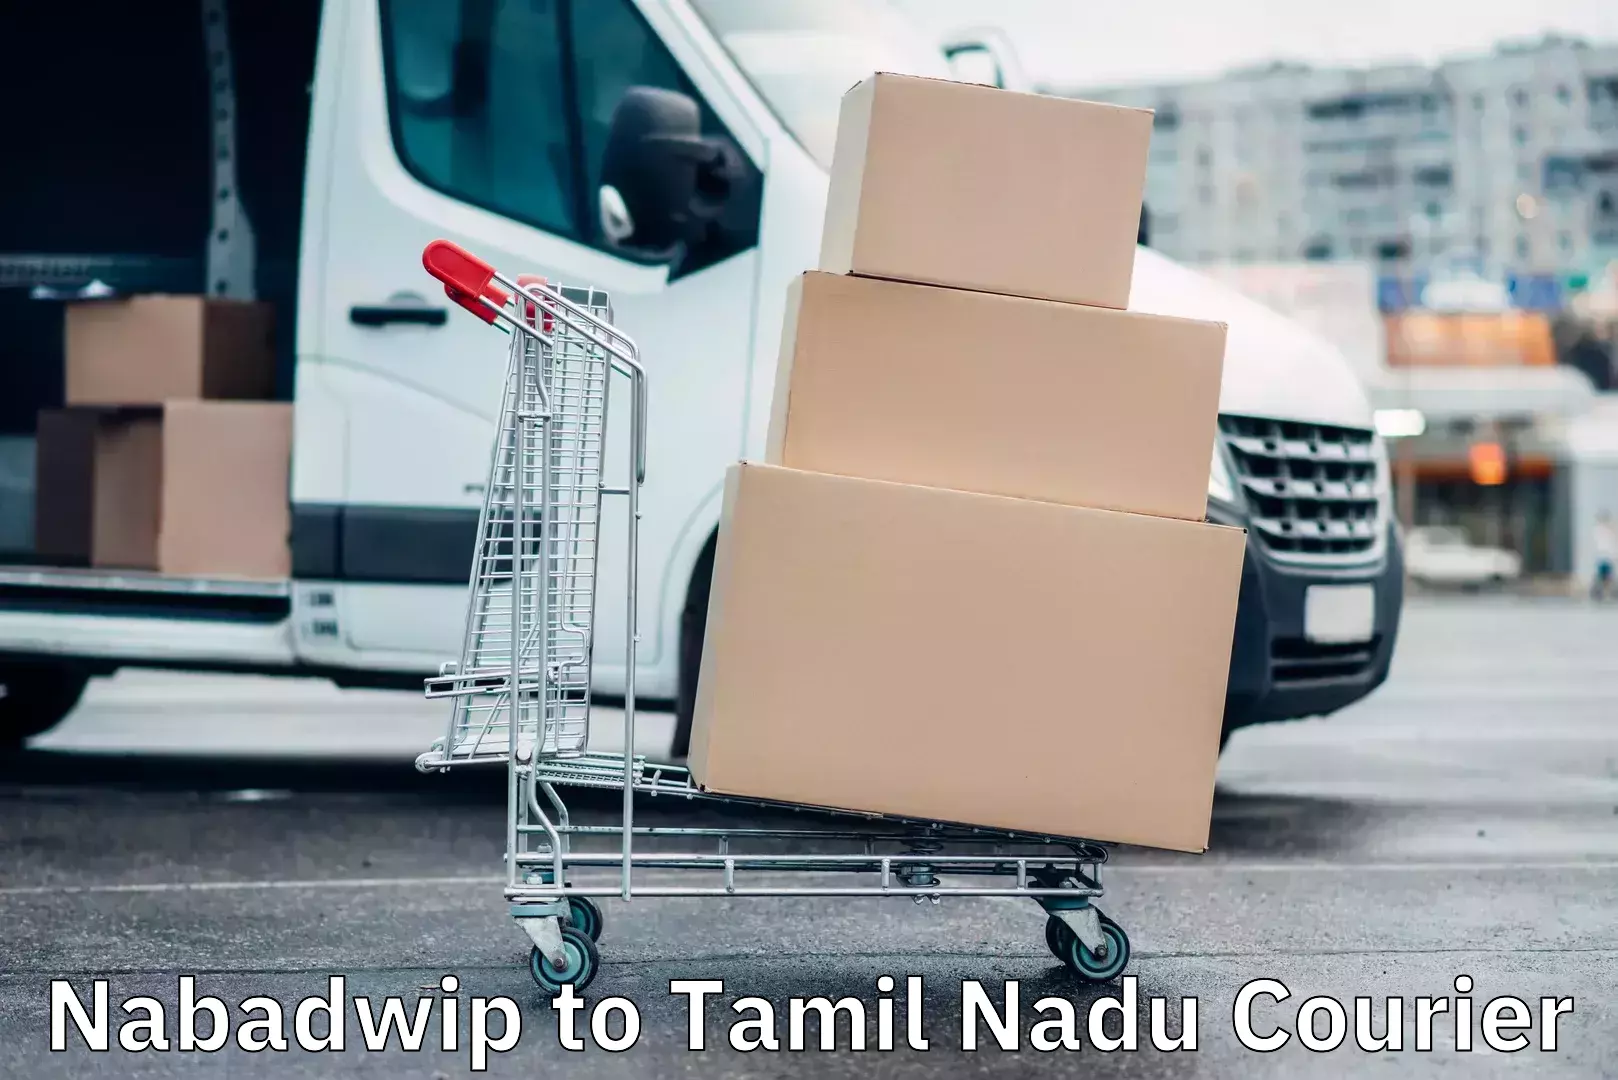 Reliable delivery network Nabadwip to Tamil Nadu